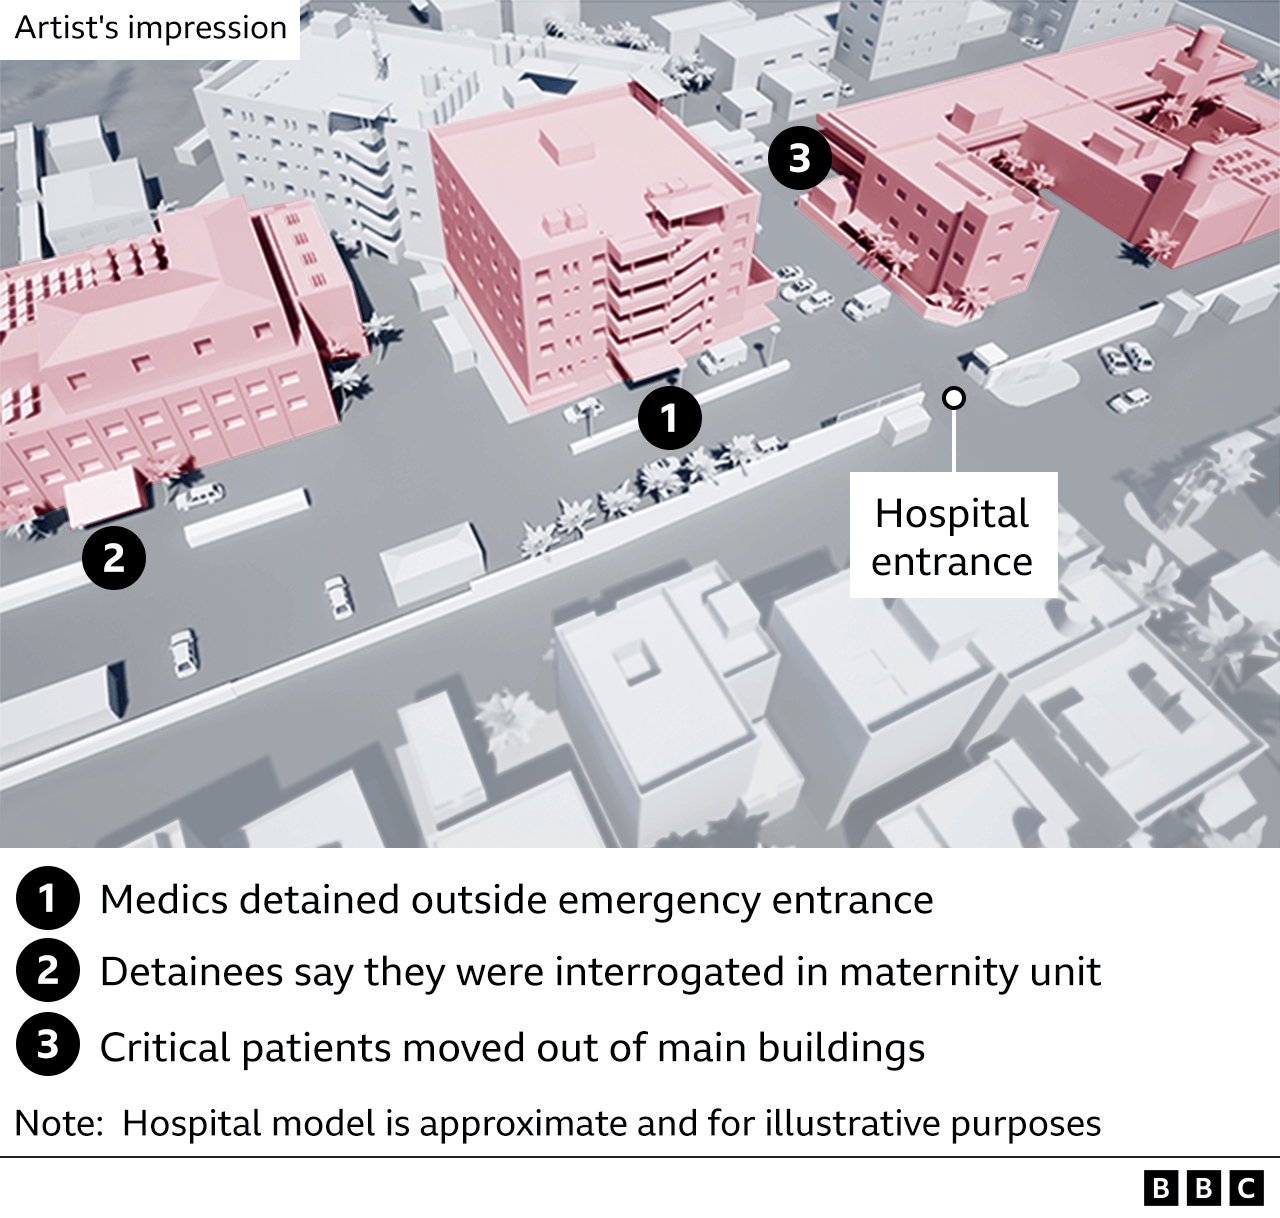 Graphic showing parts of Nasser Hospital Complex in Khan Younis where medics say they were detained and interrogated by Israeli forces